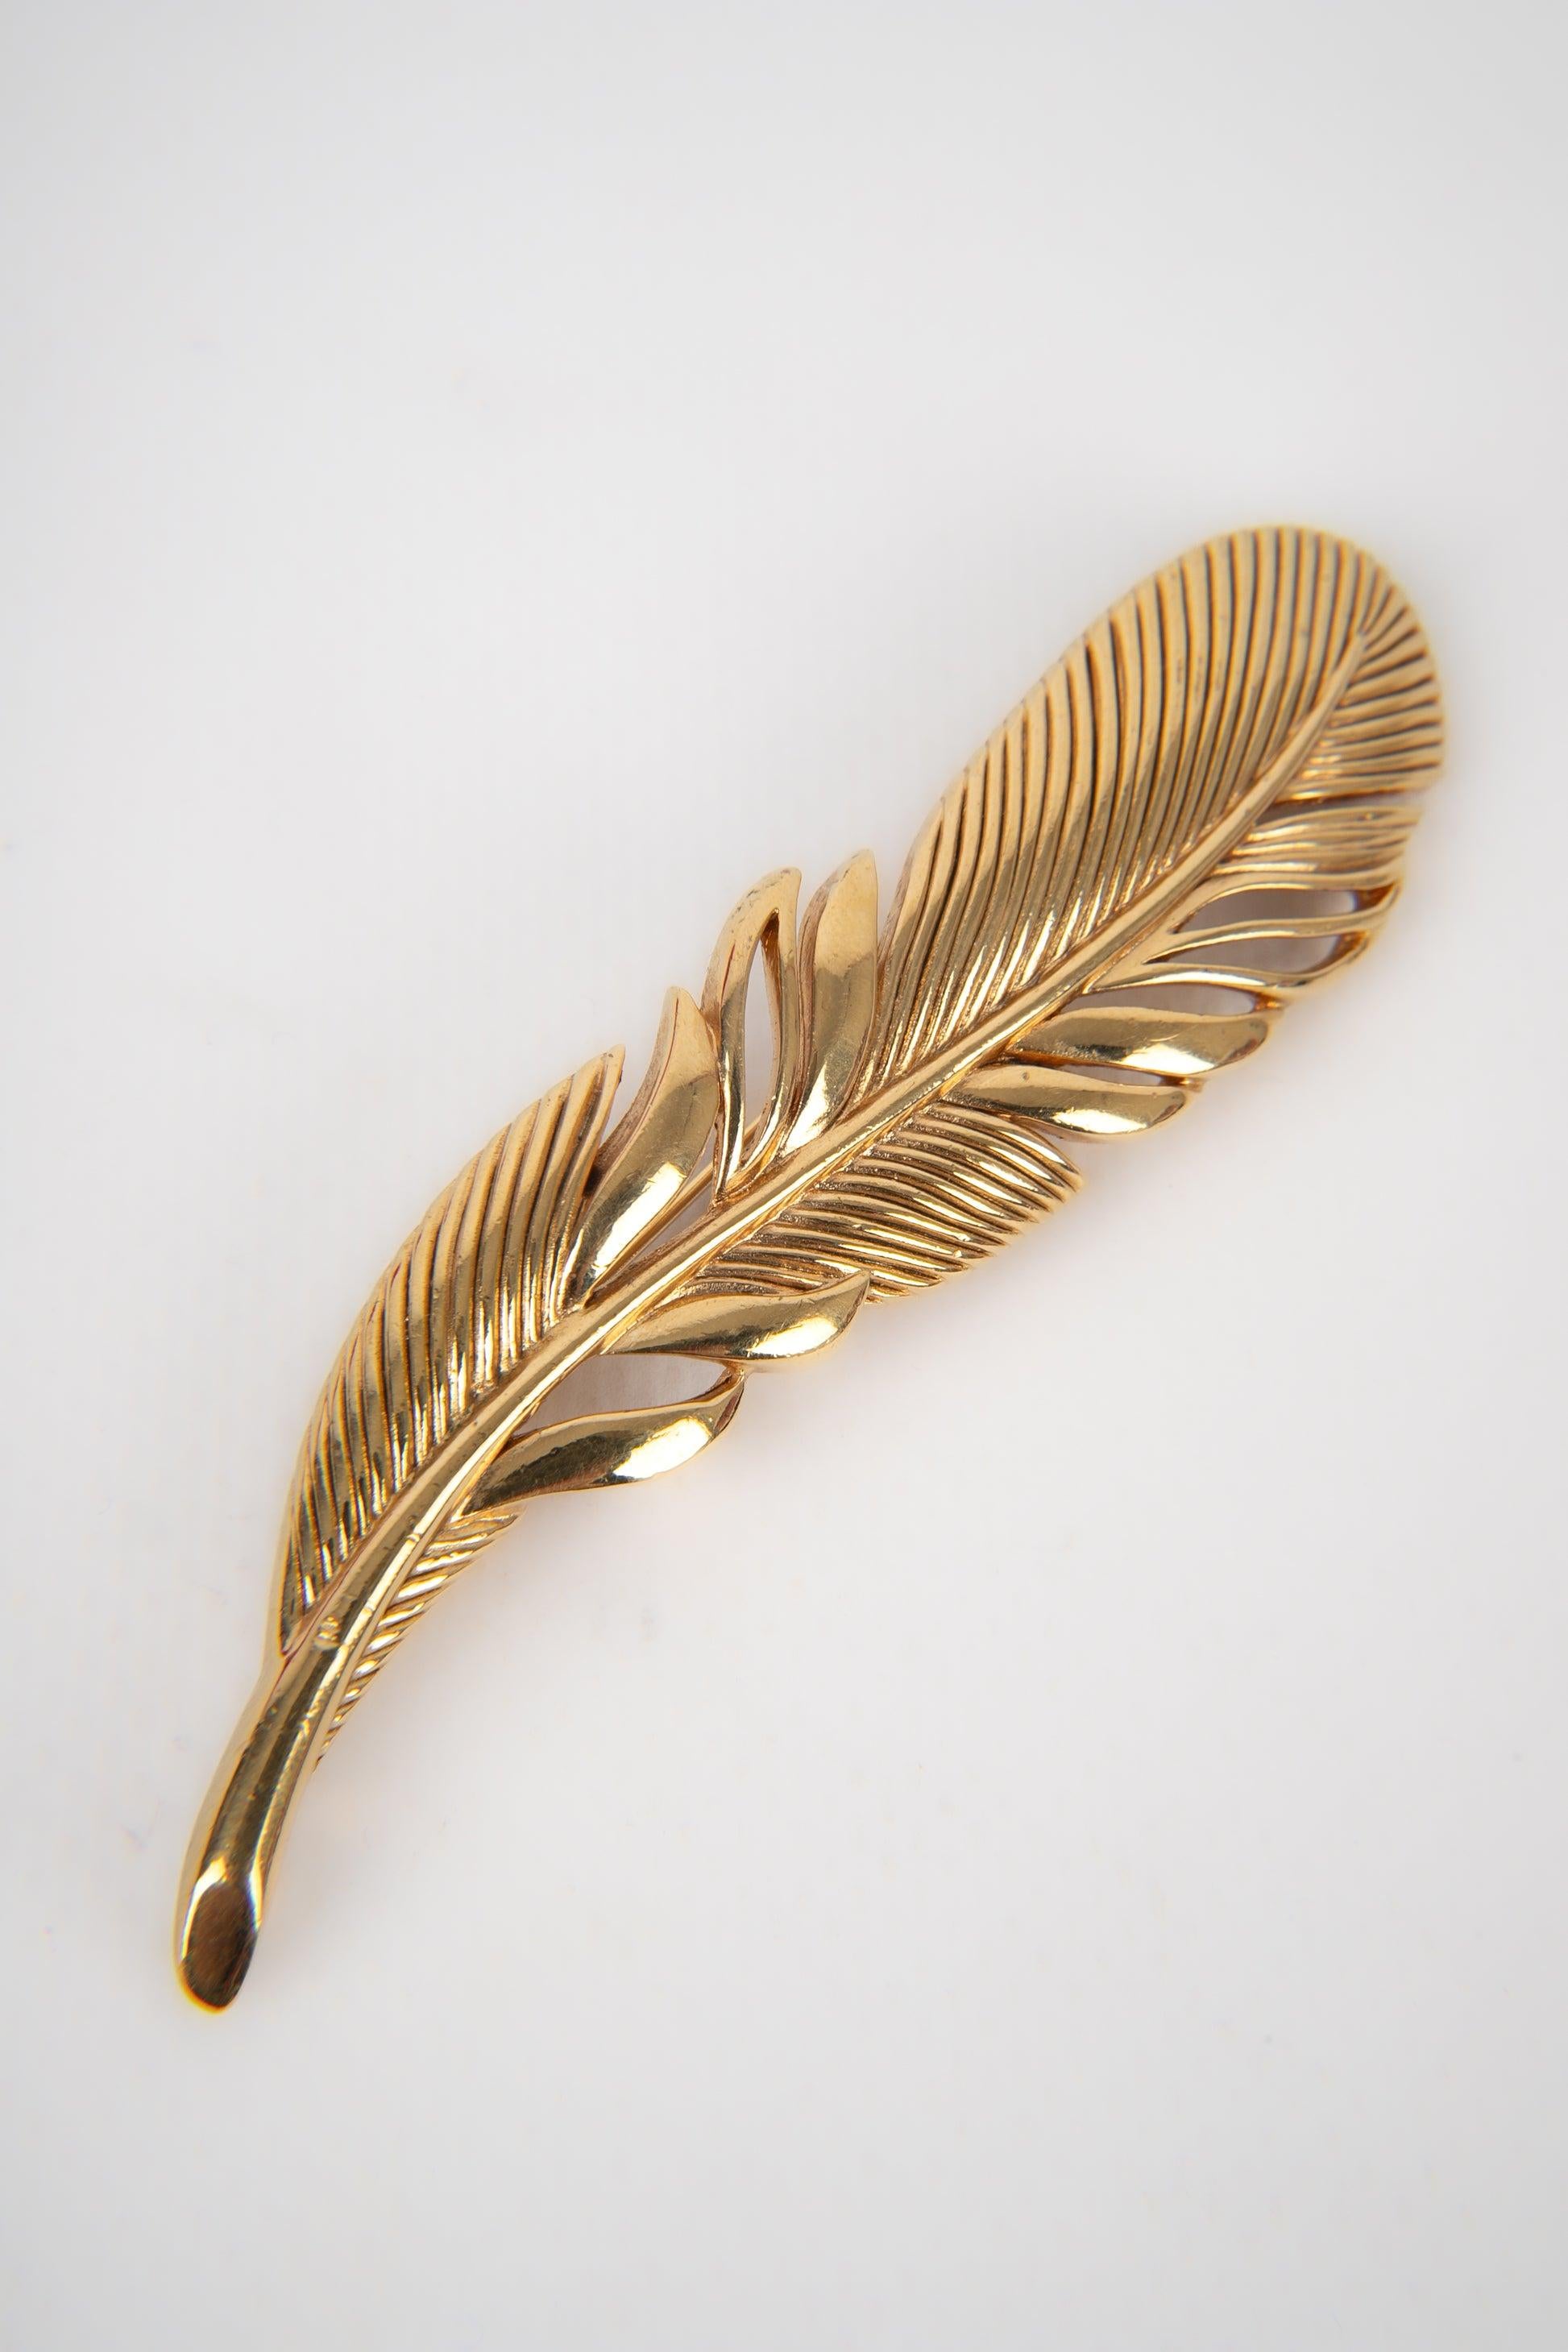 Dior - (Made in France) Golden metal brooch representing a feather.
 
 Additional information: 
 Condition: Very good condition
 Dimensions: 9 cm x 2.5 cm
 
 Seller Reference: BR141